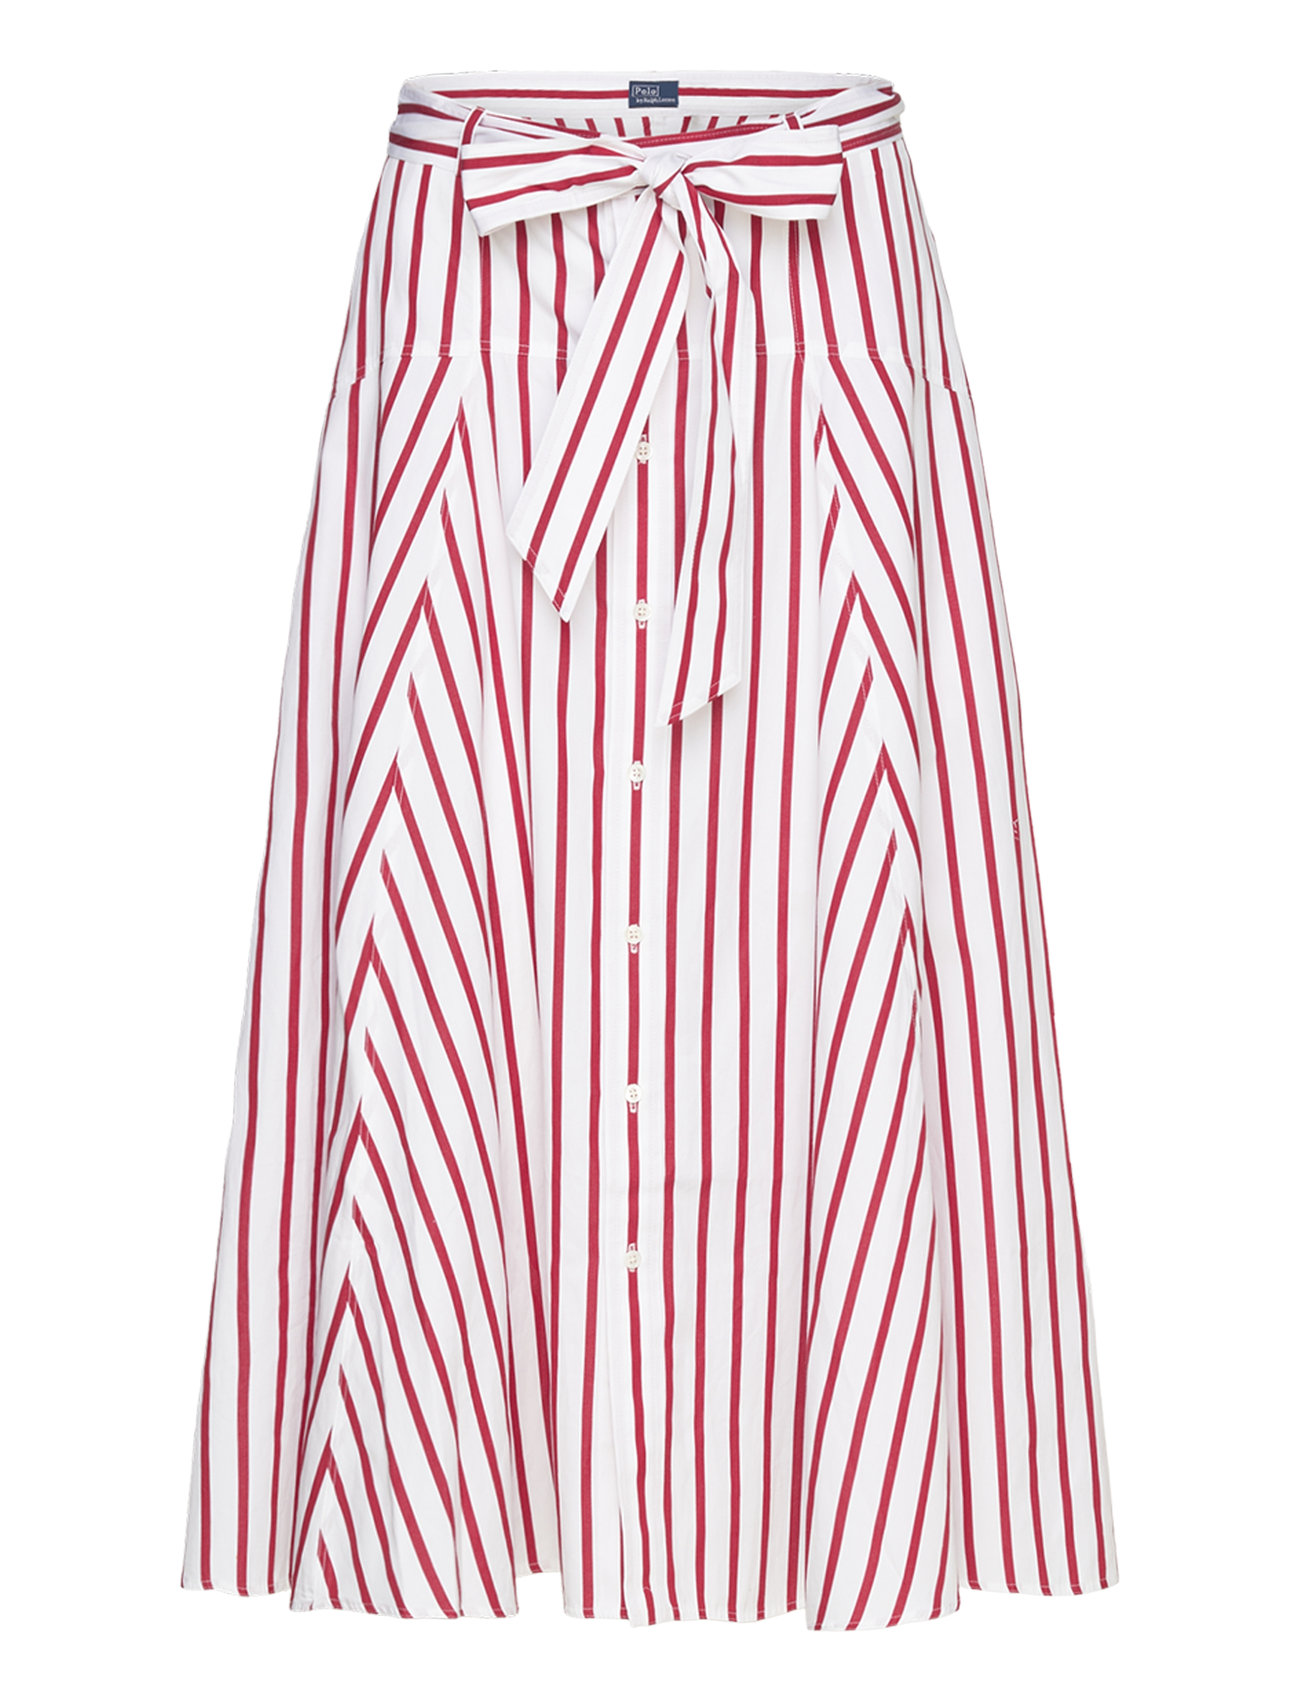 "Polo Ralph Lauren" "Striped Cotton A-Line Skirt Knælang Nederdel Red Polo